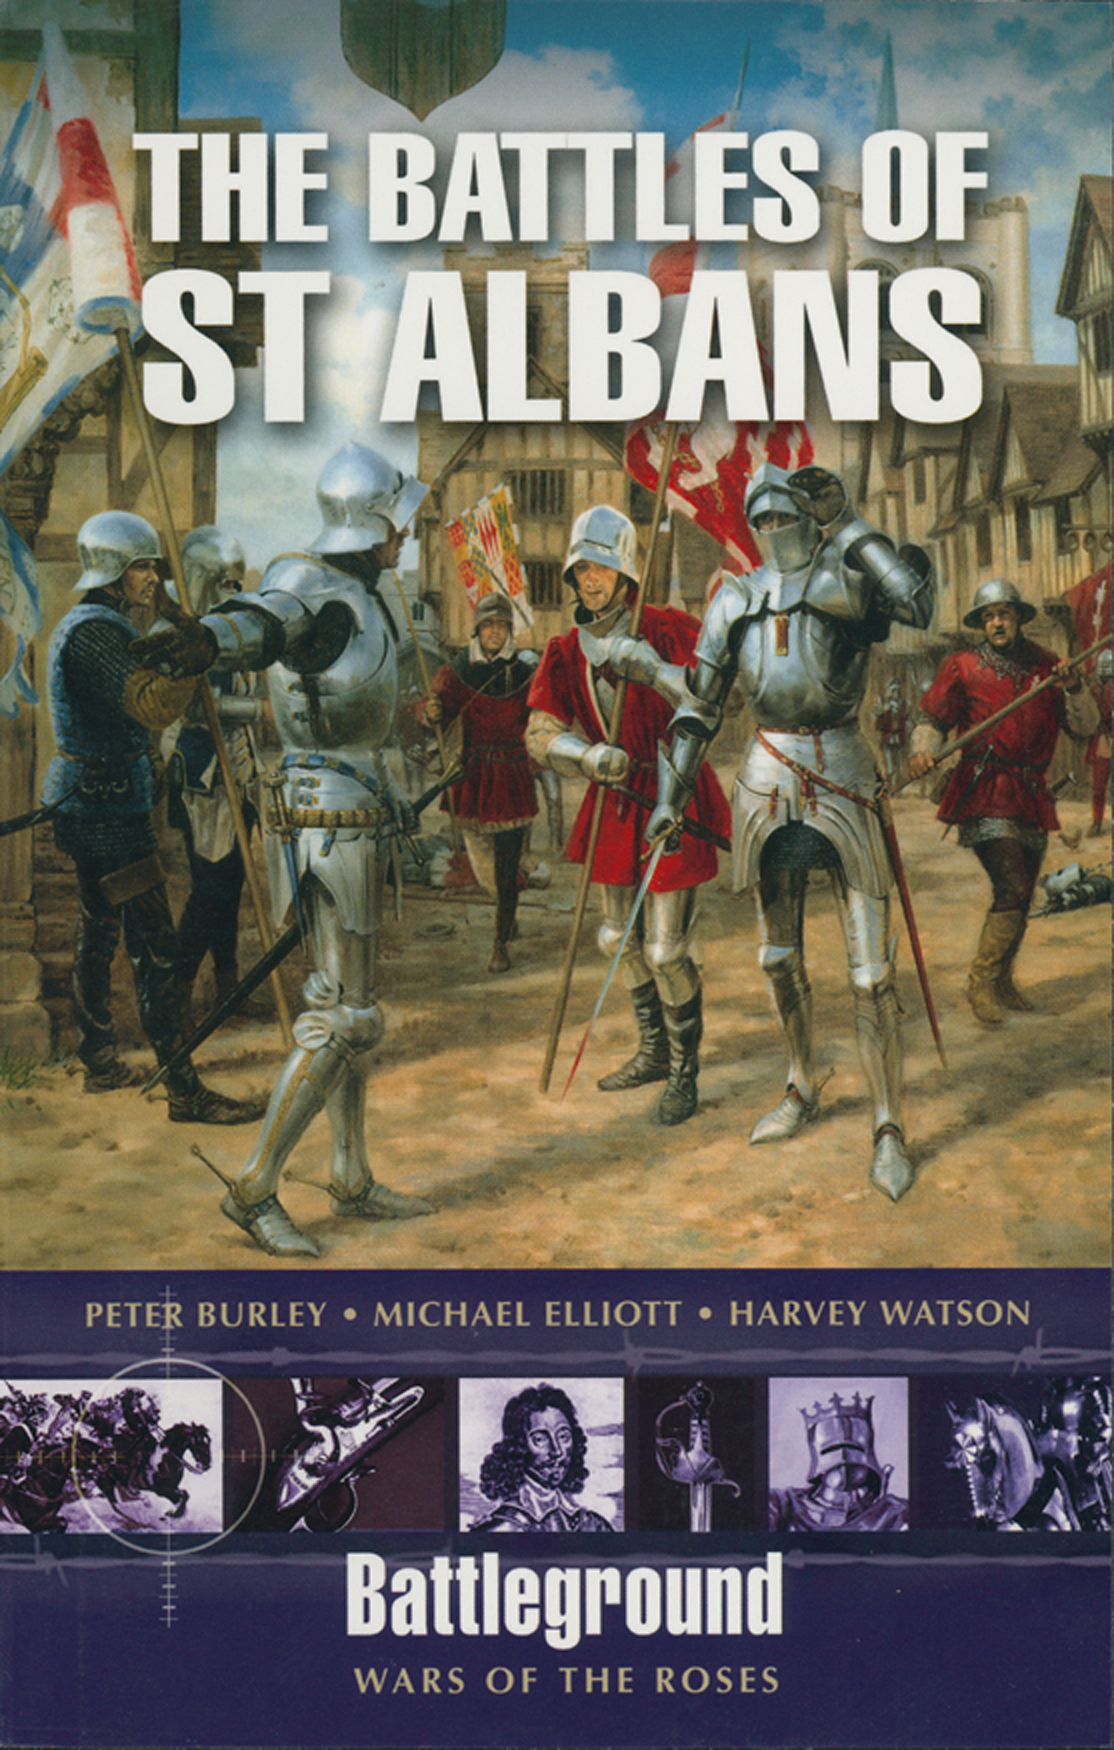 Wars of the Roses: The Battles of St Albans